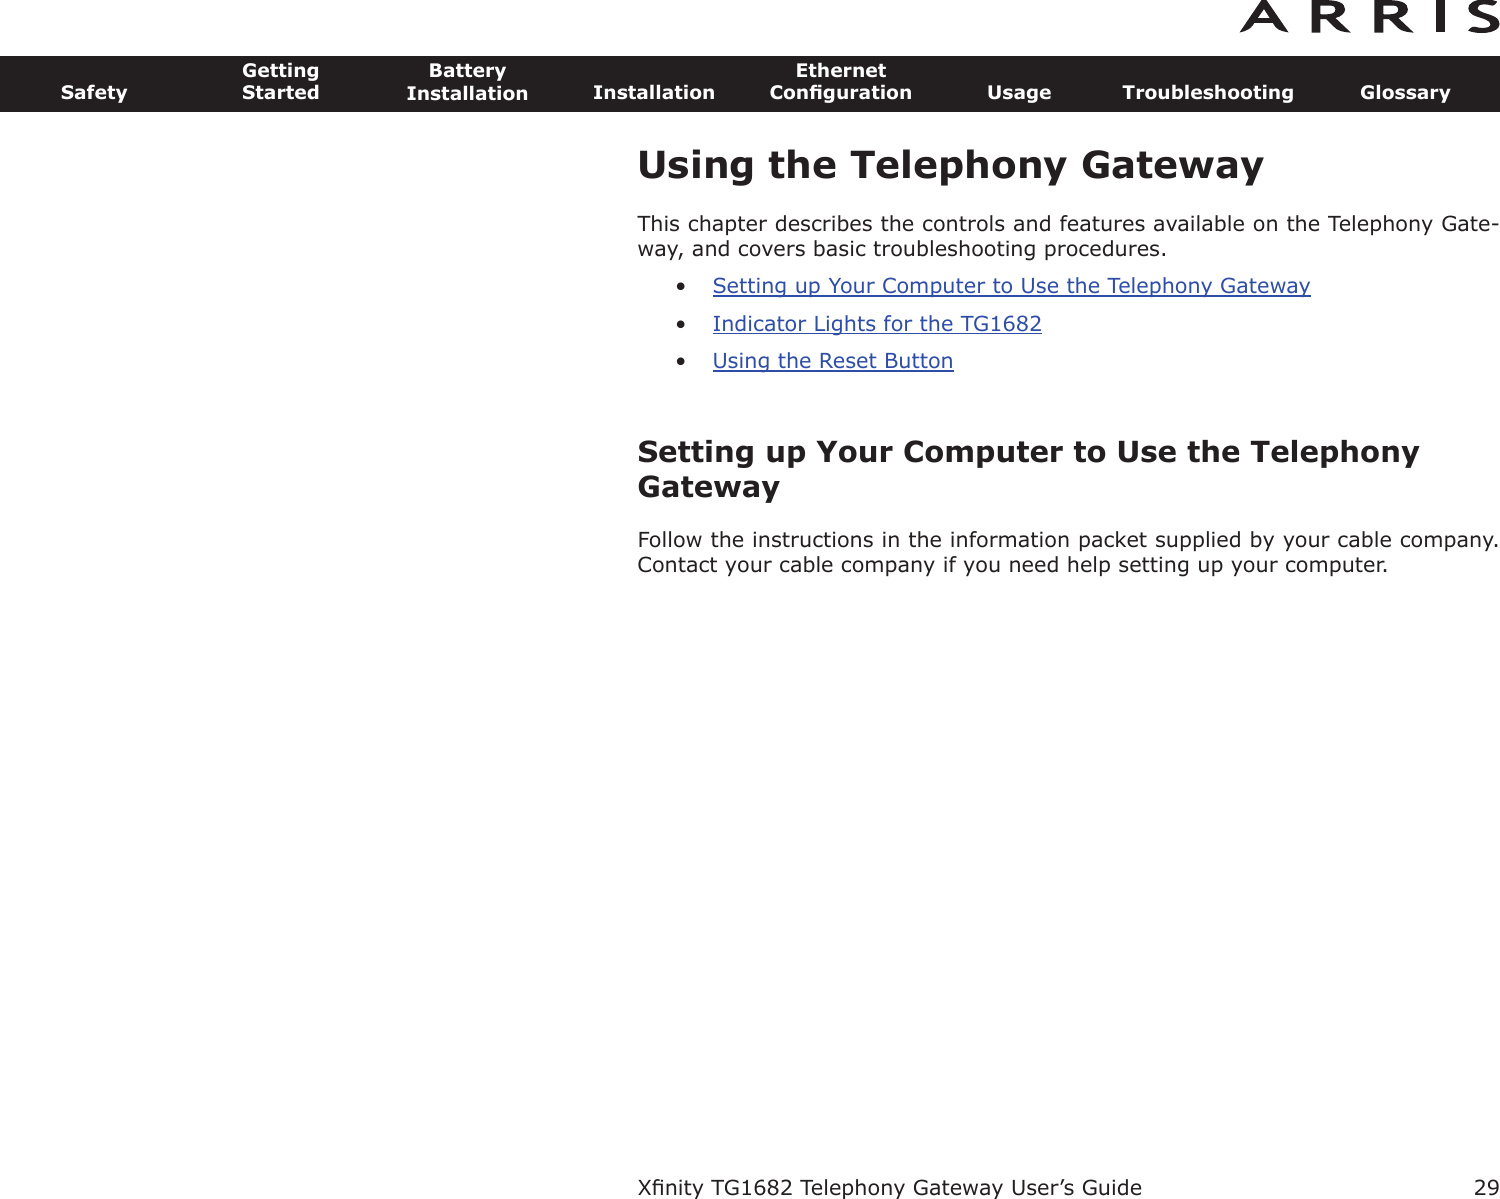 29SafetyGettingStartedBatteryInstallation InstallationEthernetConﬁguration Usage Troubleshooting GlossaryXﬁnity TG1682 Telephony Gateway User’s GuideUsing the Telephony GatewayThis chapter describes the controls and features available on the Telephony Gate-way, and covers basic troubleshooting procedures.•Setting up Your Computer to Use the Telephony Gateway•Indicator Lights for the TG1682•Using the Reset ButtonSetting up Your Computer to Use the TelephonyGatewayFollow the instructions in the information packet supplied by your cable company.Contact your cable company if you need help setting up your computer.